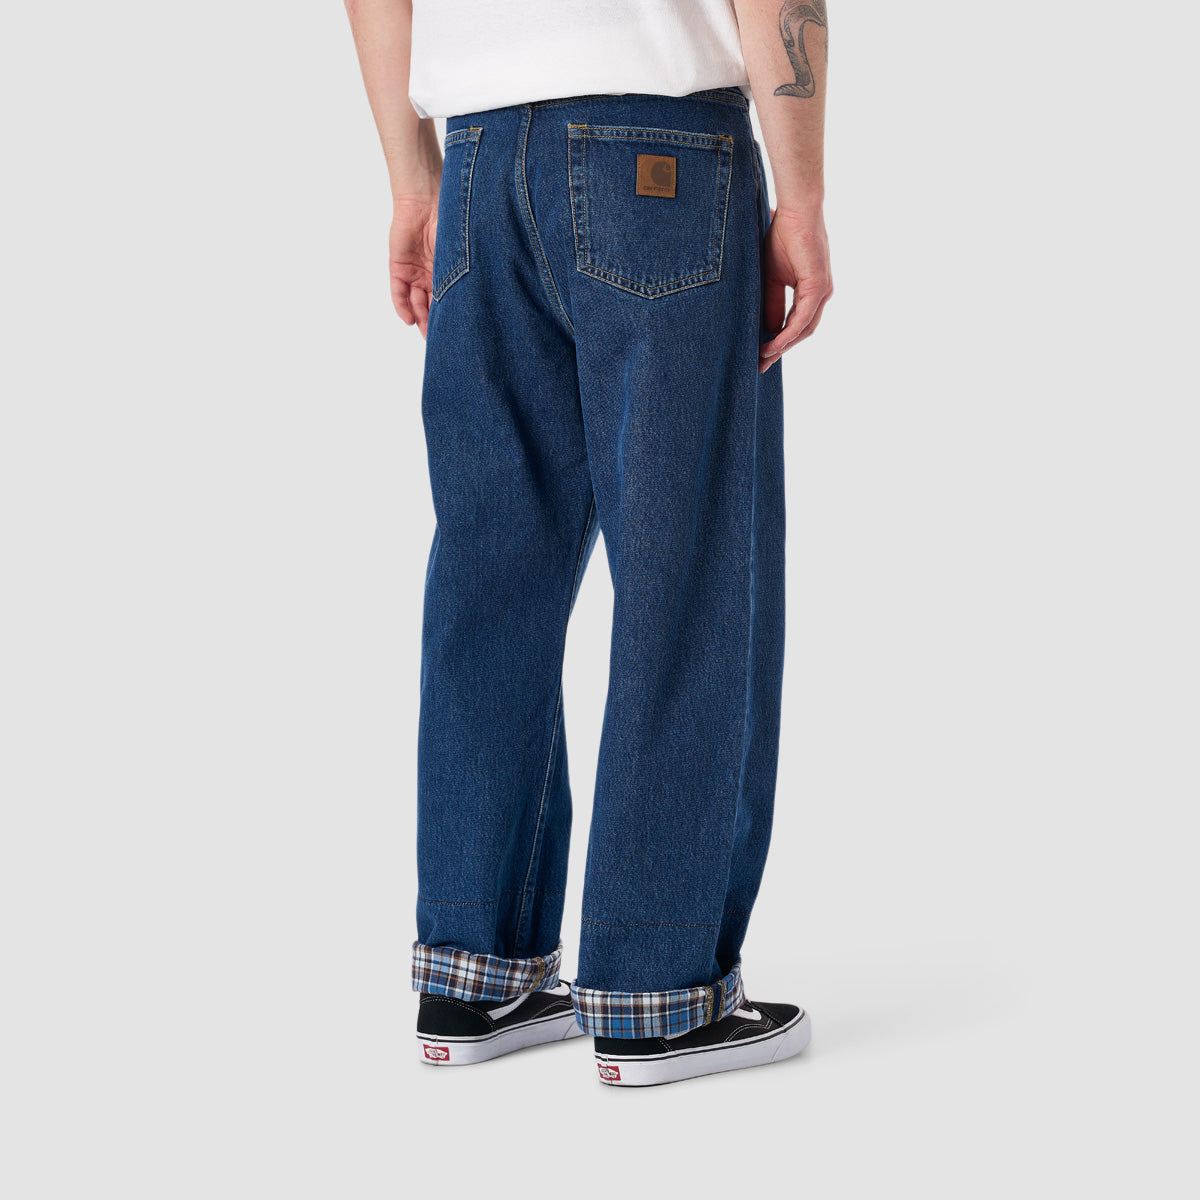 Carhartt WIP Rider Pants Blue Stone Washed